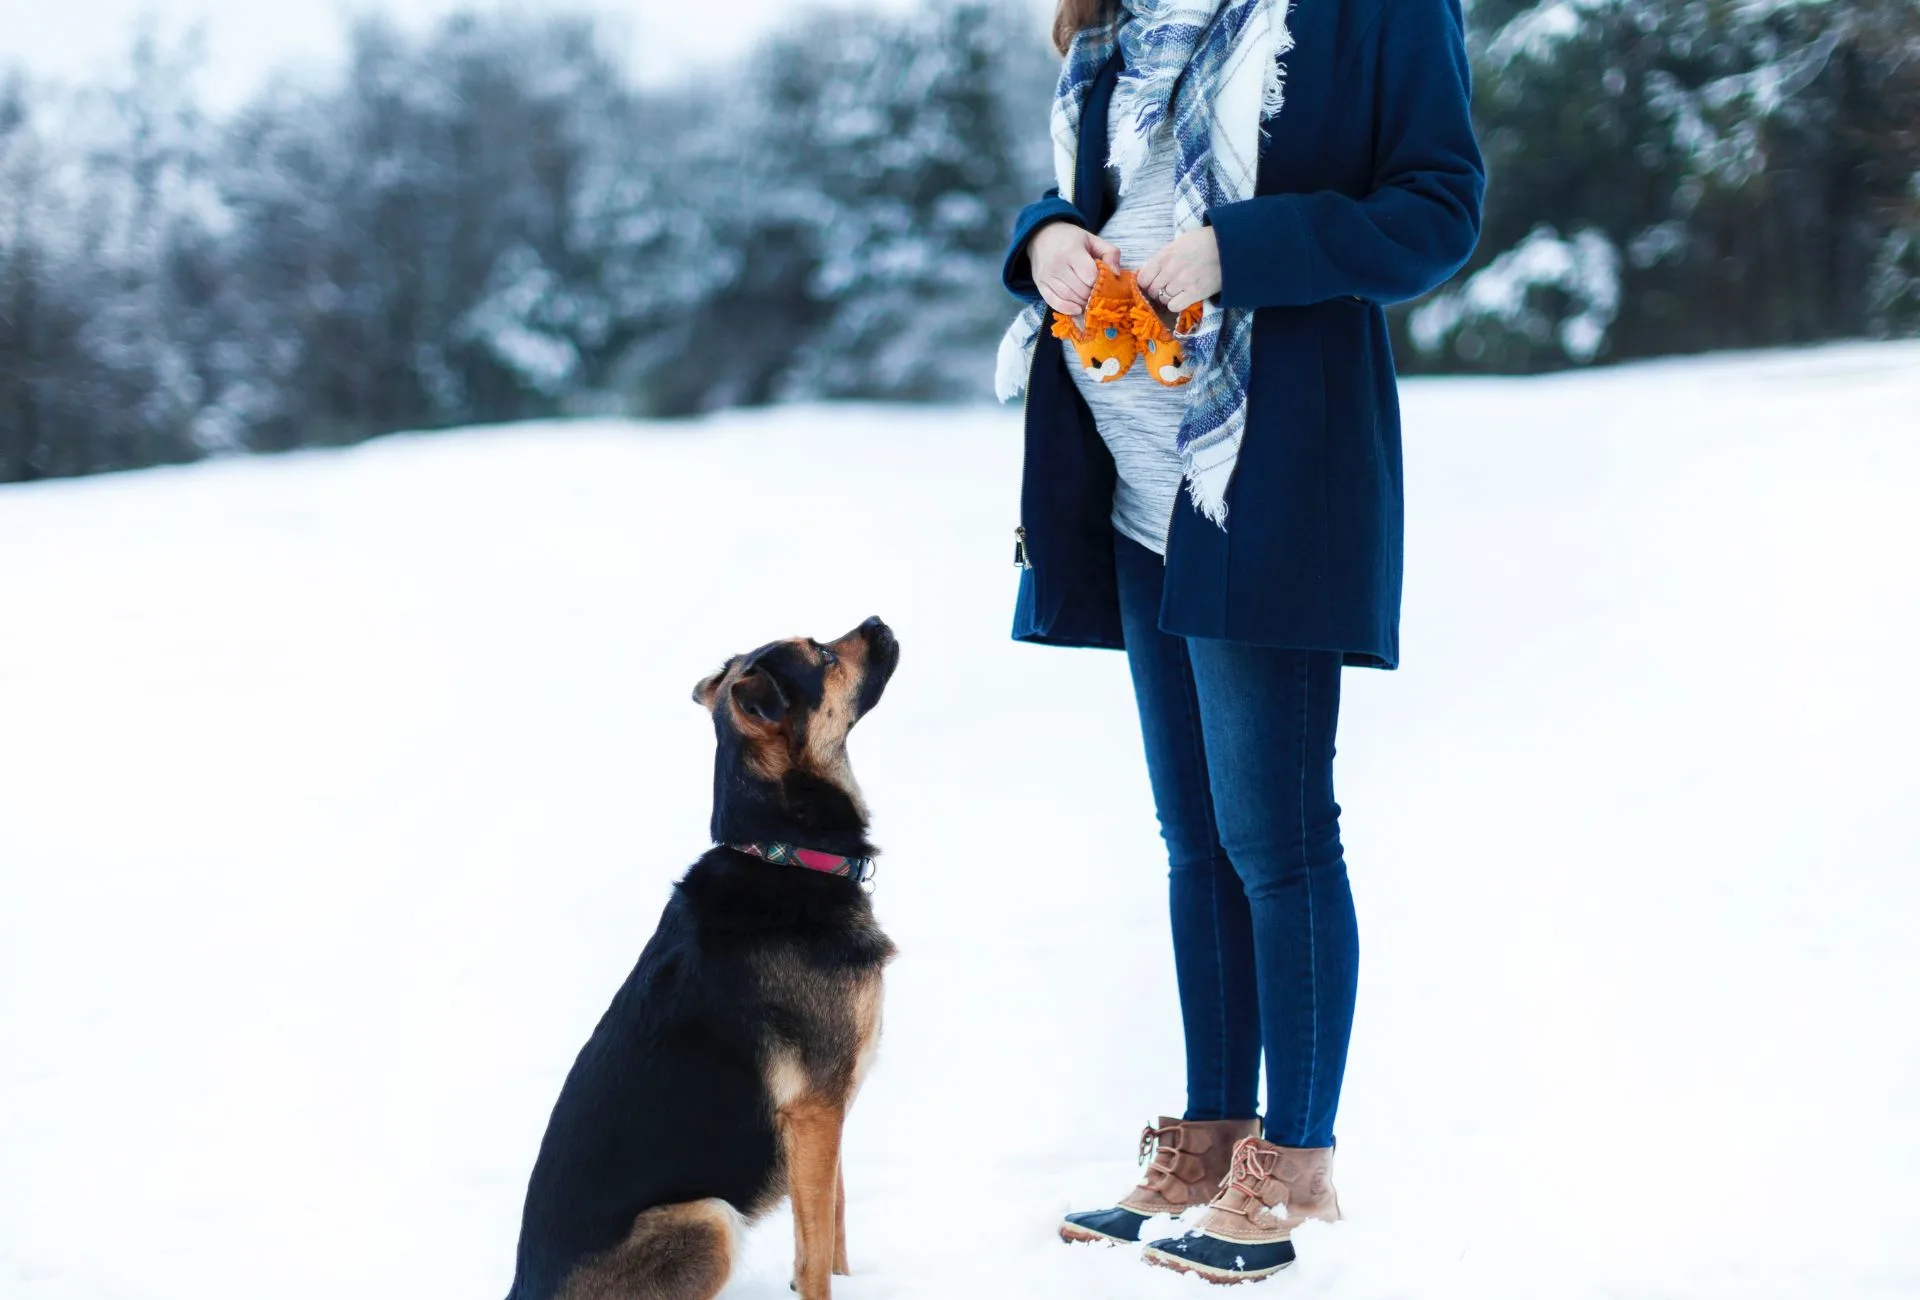 Pregnant woman standing in front of black dog in snow.